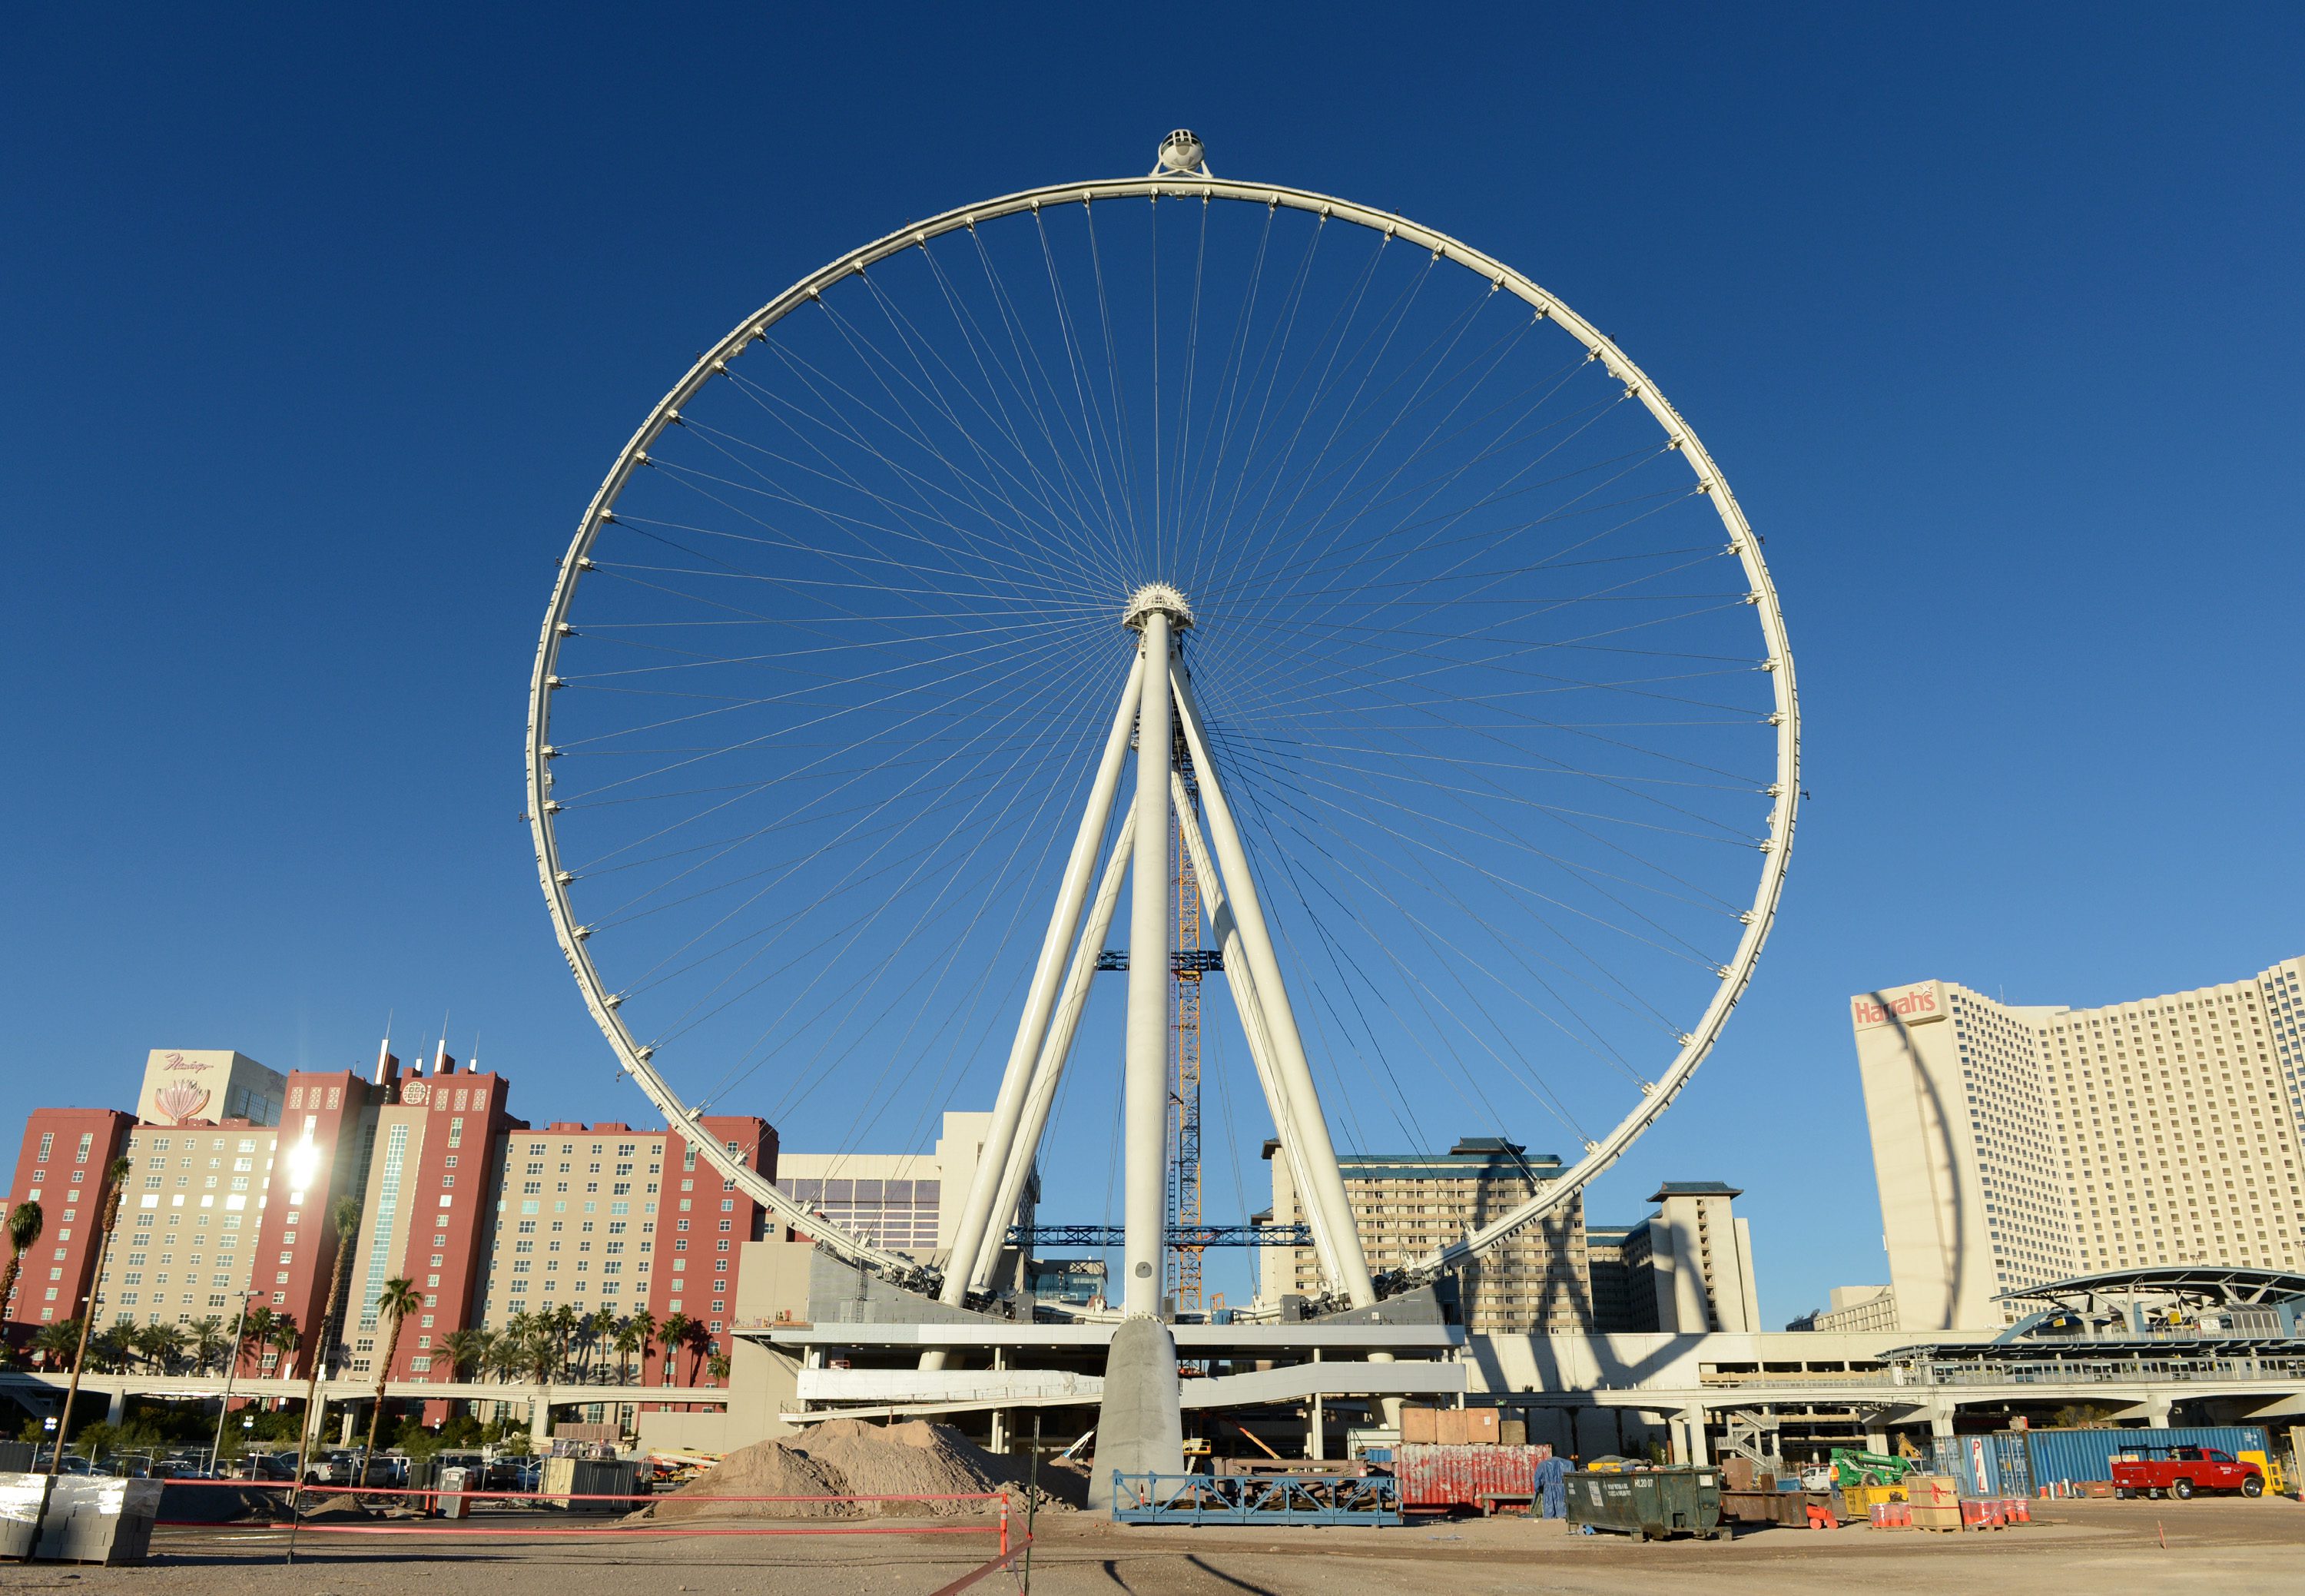 The first passenger cabin is rotated to the top of the Las Vegas High Roller, officially making it the world’s tallest observation wheel at 550 feet.